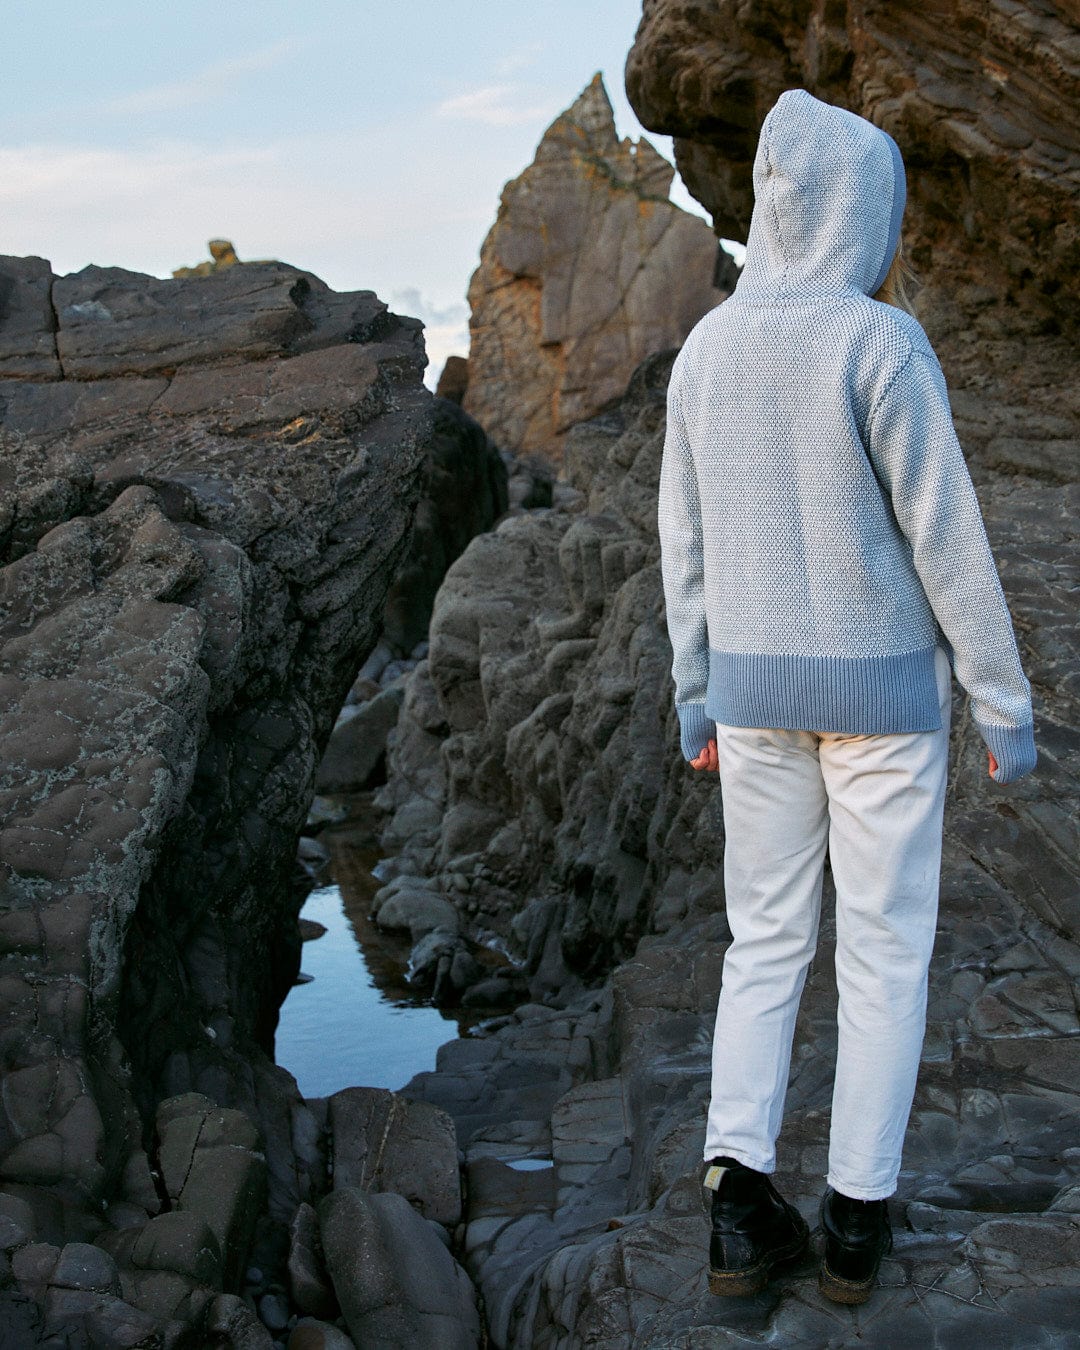 A person wearing the Poppy - Womens Knitted Pop Hoodie - Blue standing on a rocky shore, showcasing Saltrock branding.